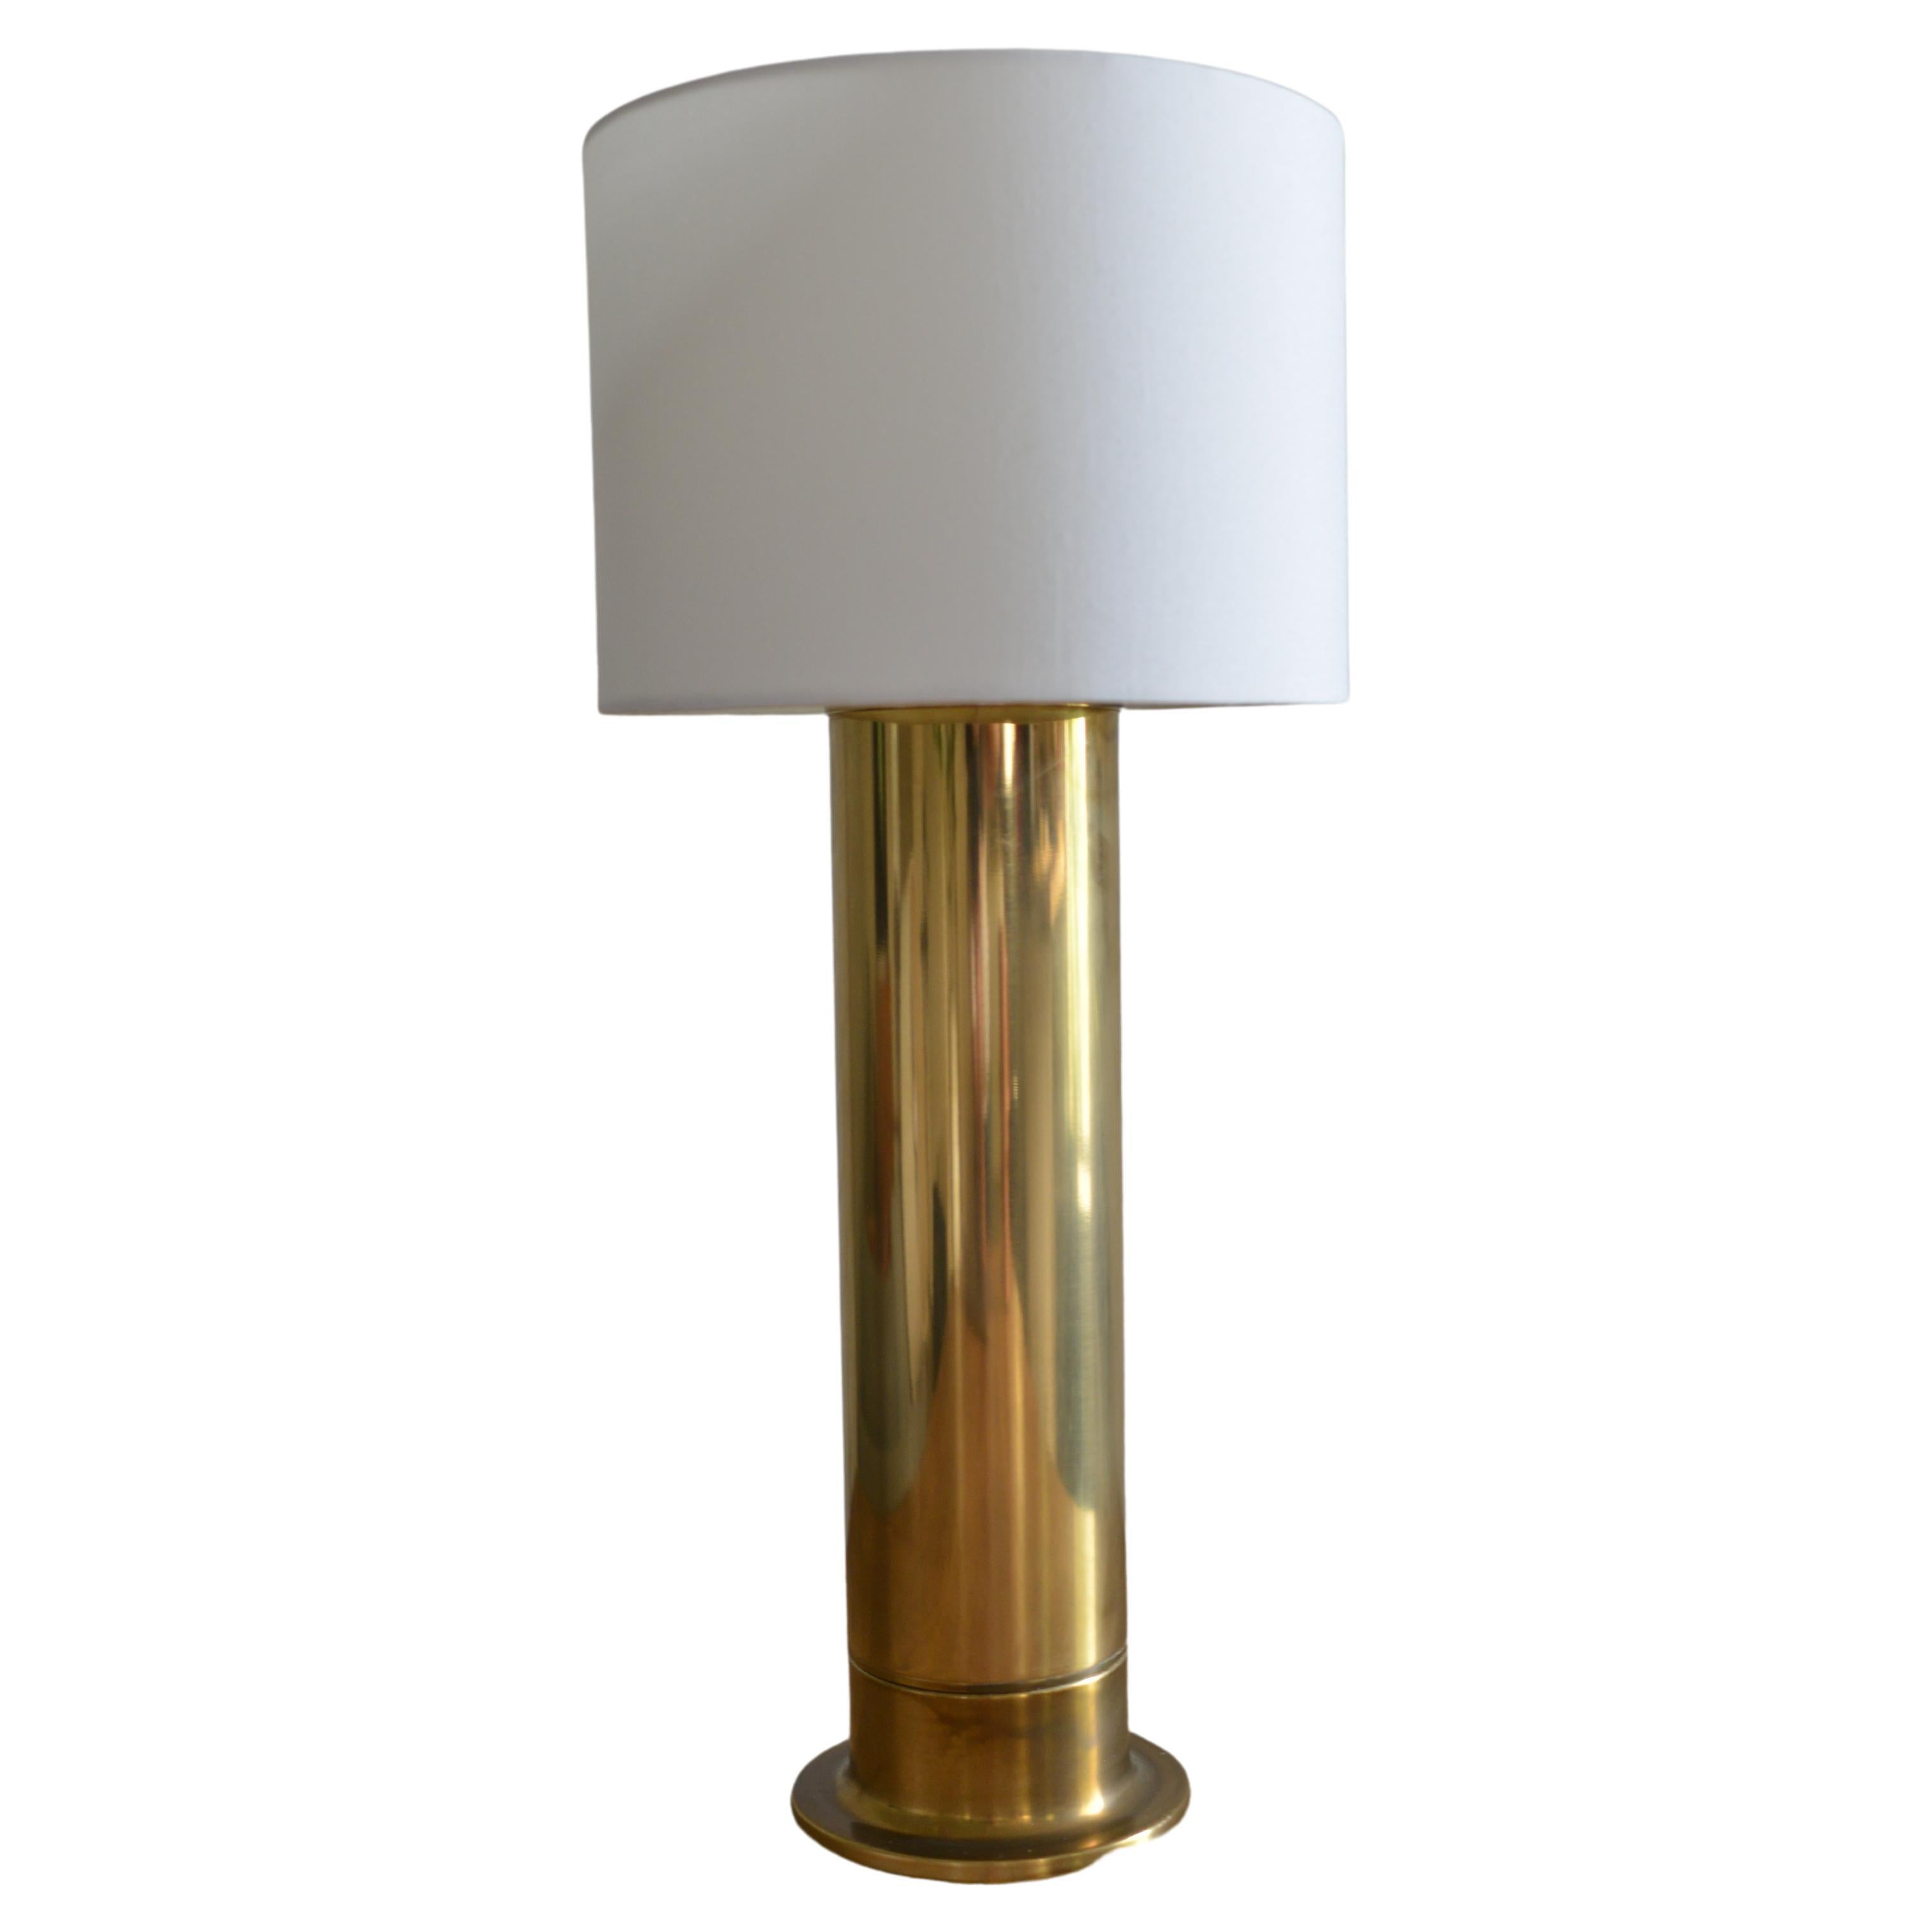 1960s Hans Agne Jakobsson for Ab Markyard Brass Table Lamp For Sale